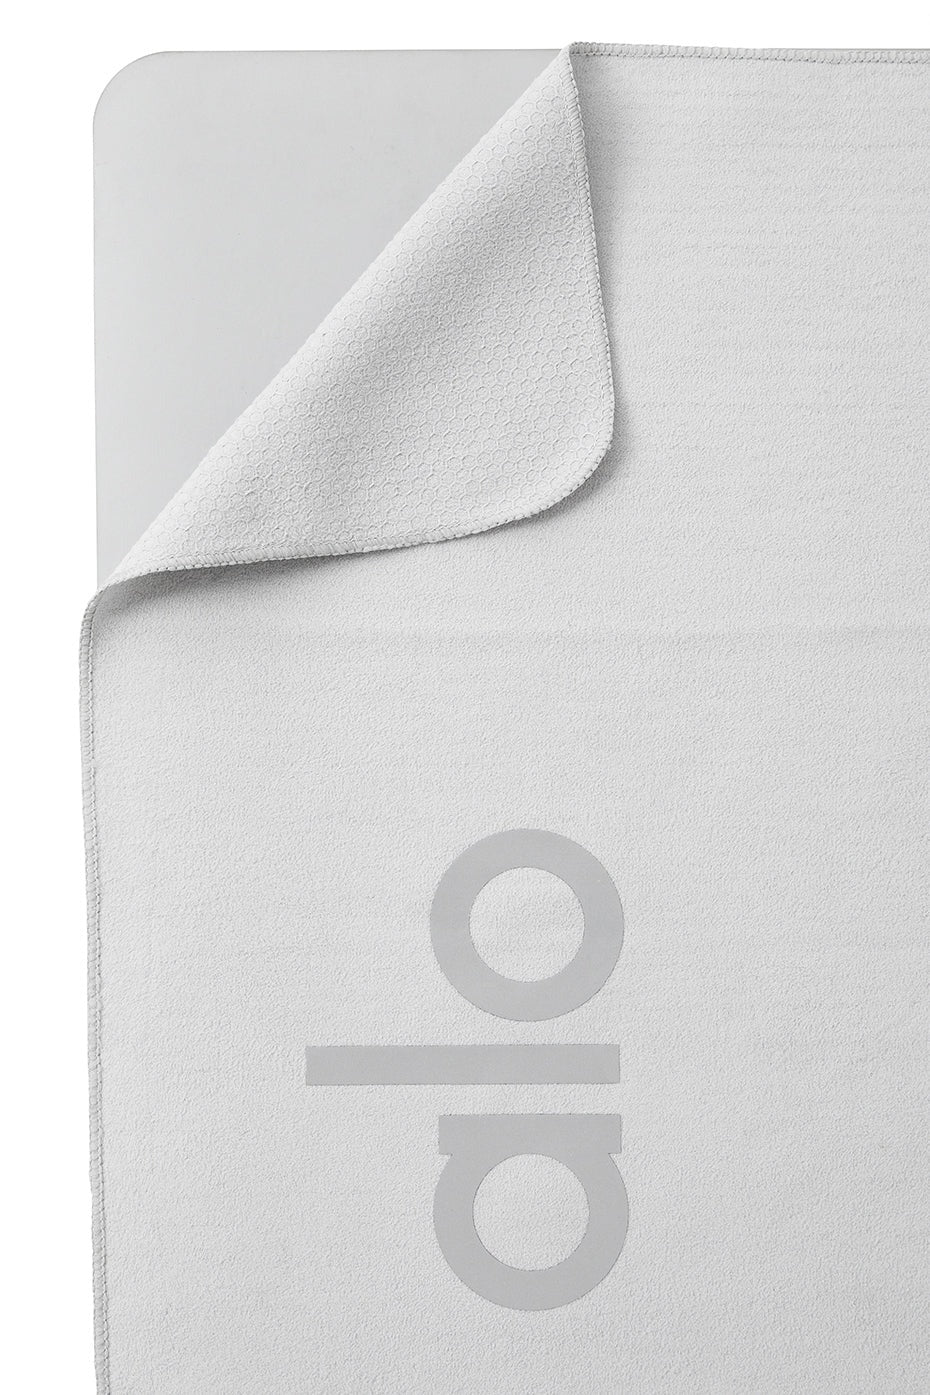 ALO Grounded No-Slip Mat Towel – Leisure Social